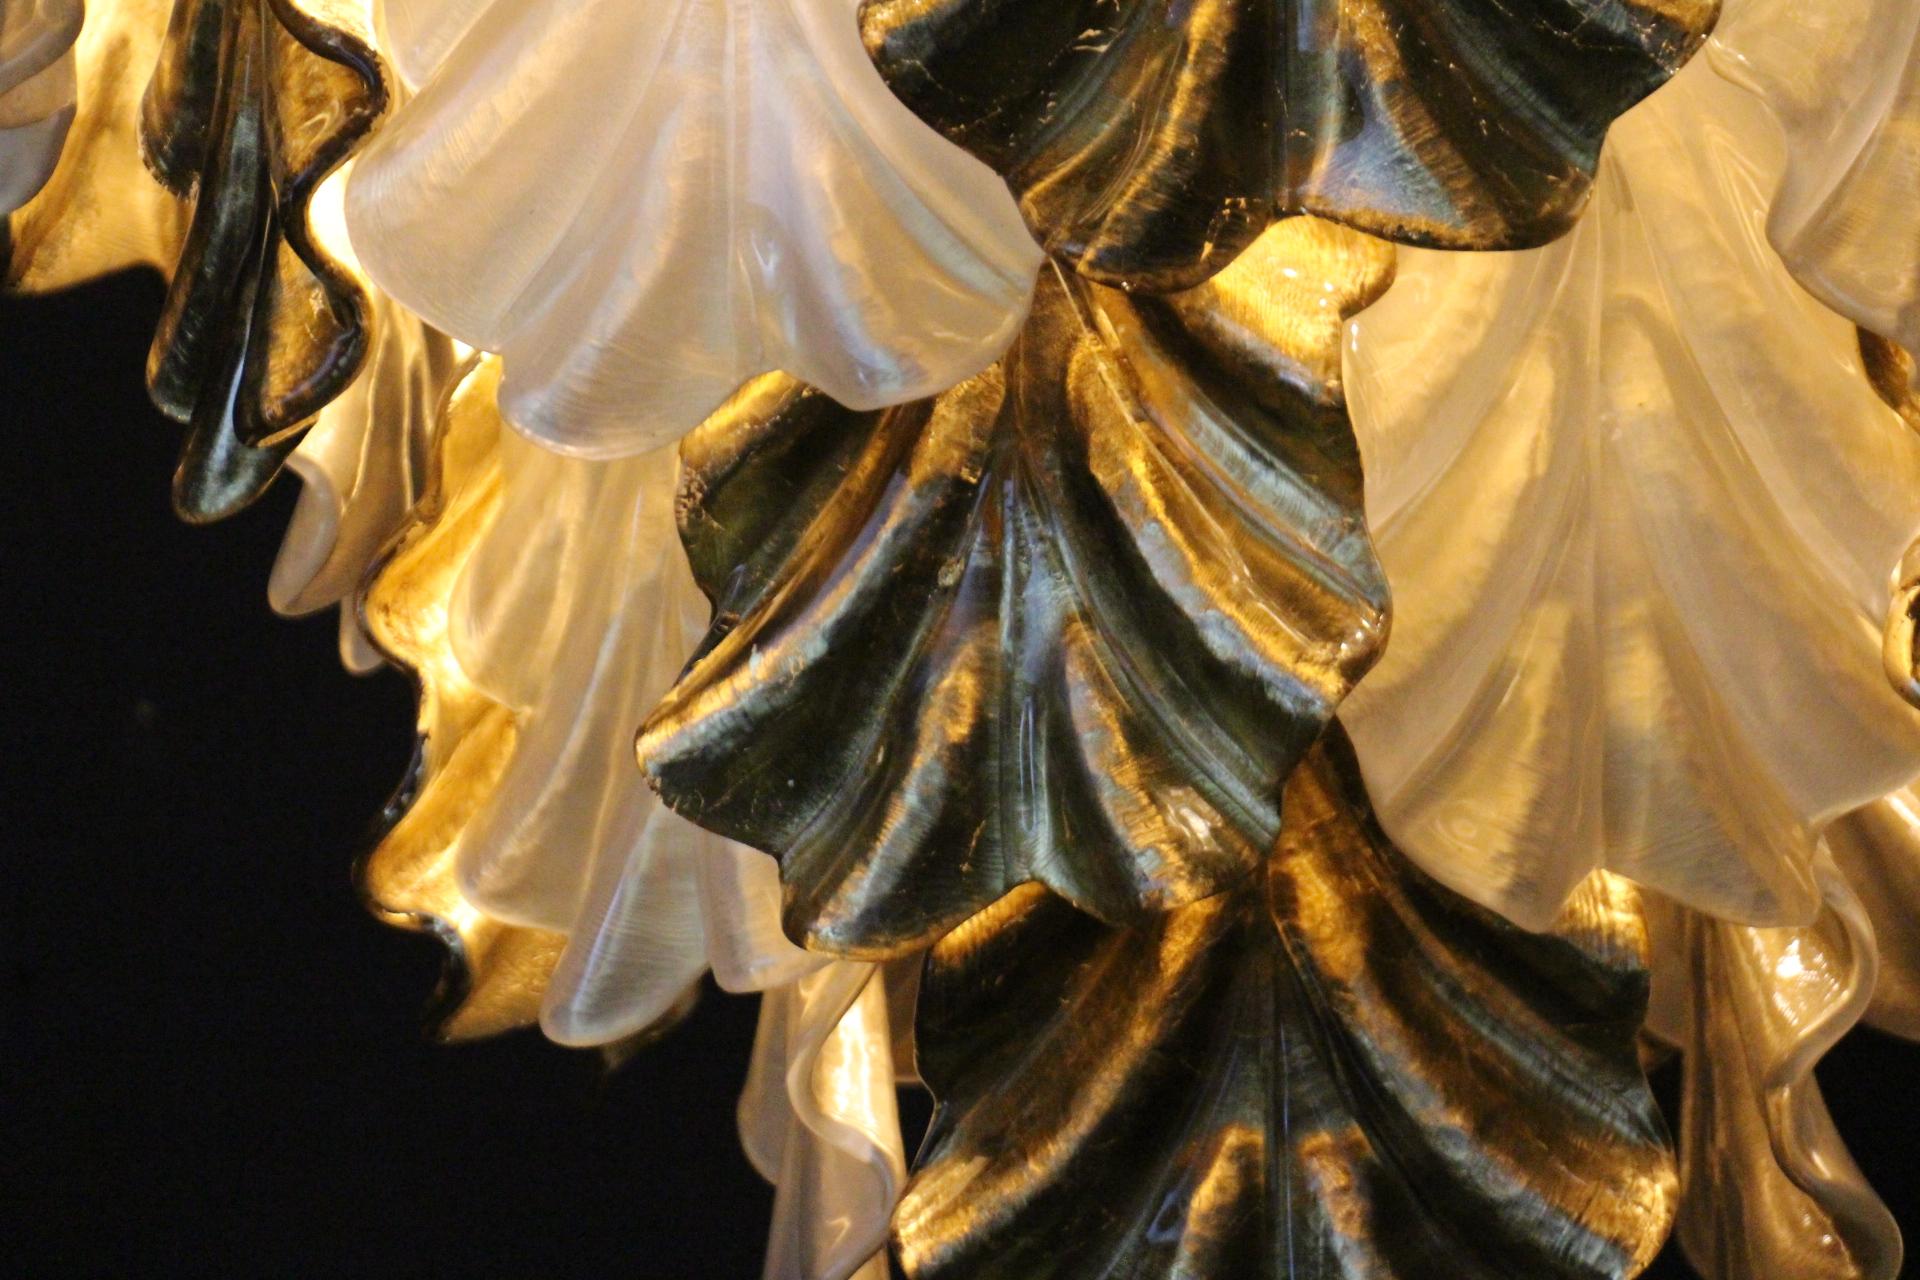 Iridescent Pearly and Golden Italian Murano Glass Chandelier In Barovier Style For Sale 6